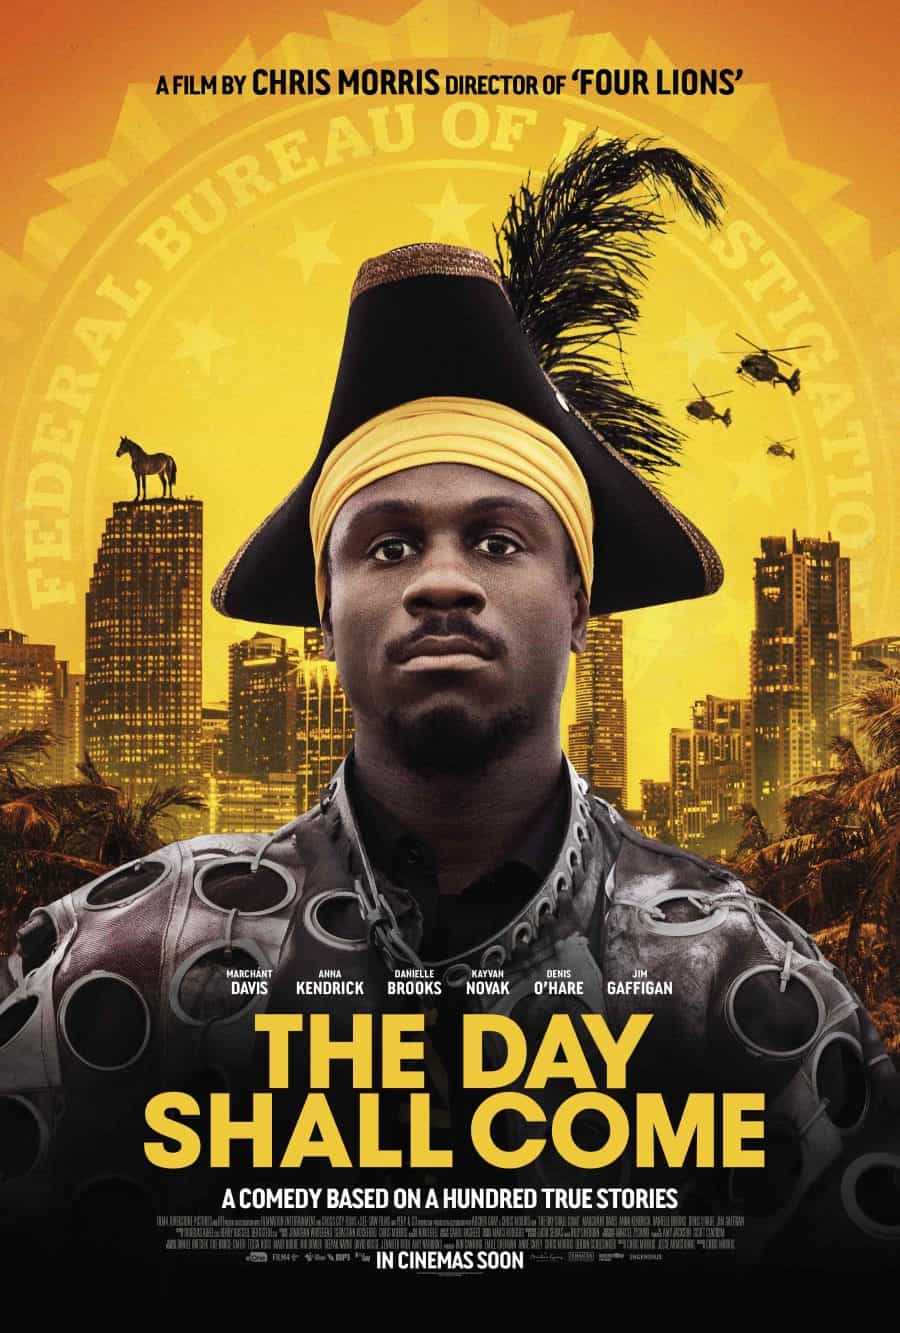 The Day Shall Come is given a 15 age rating in the UK for strong language, sex references, drug misuse